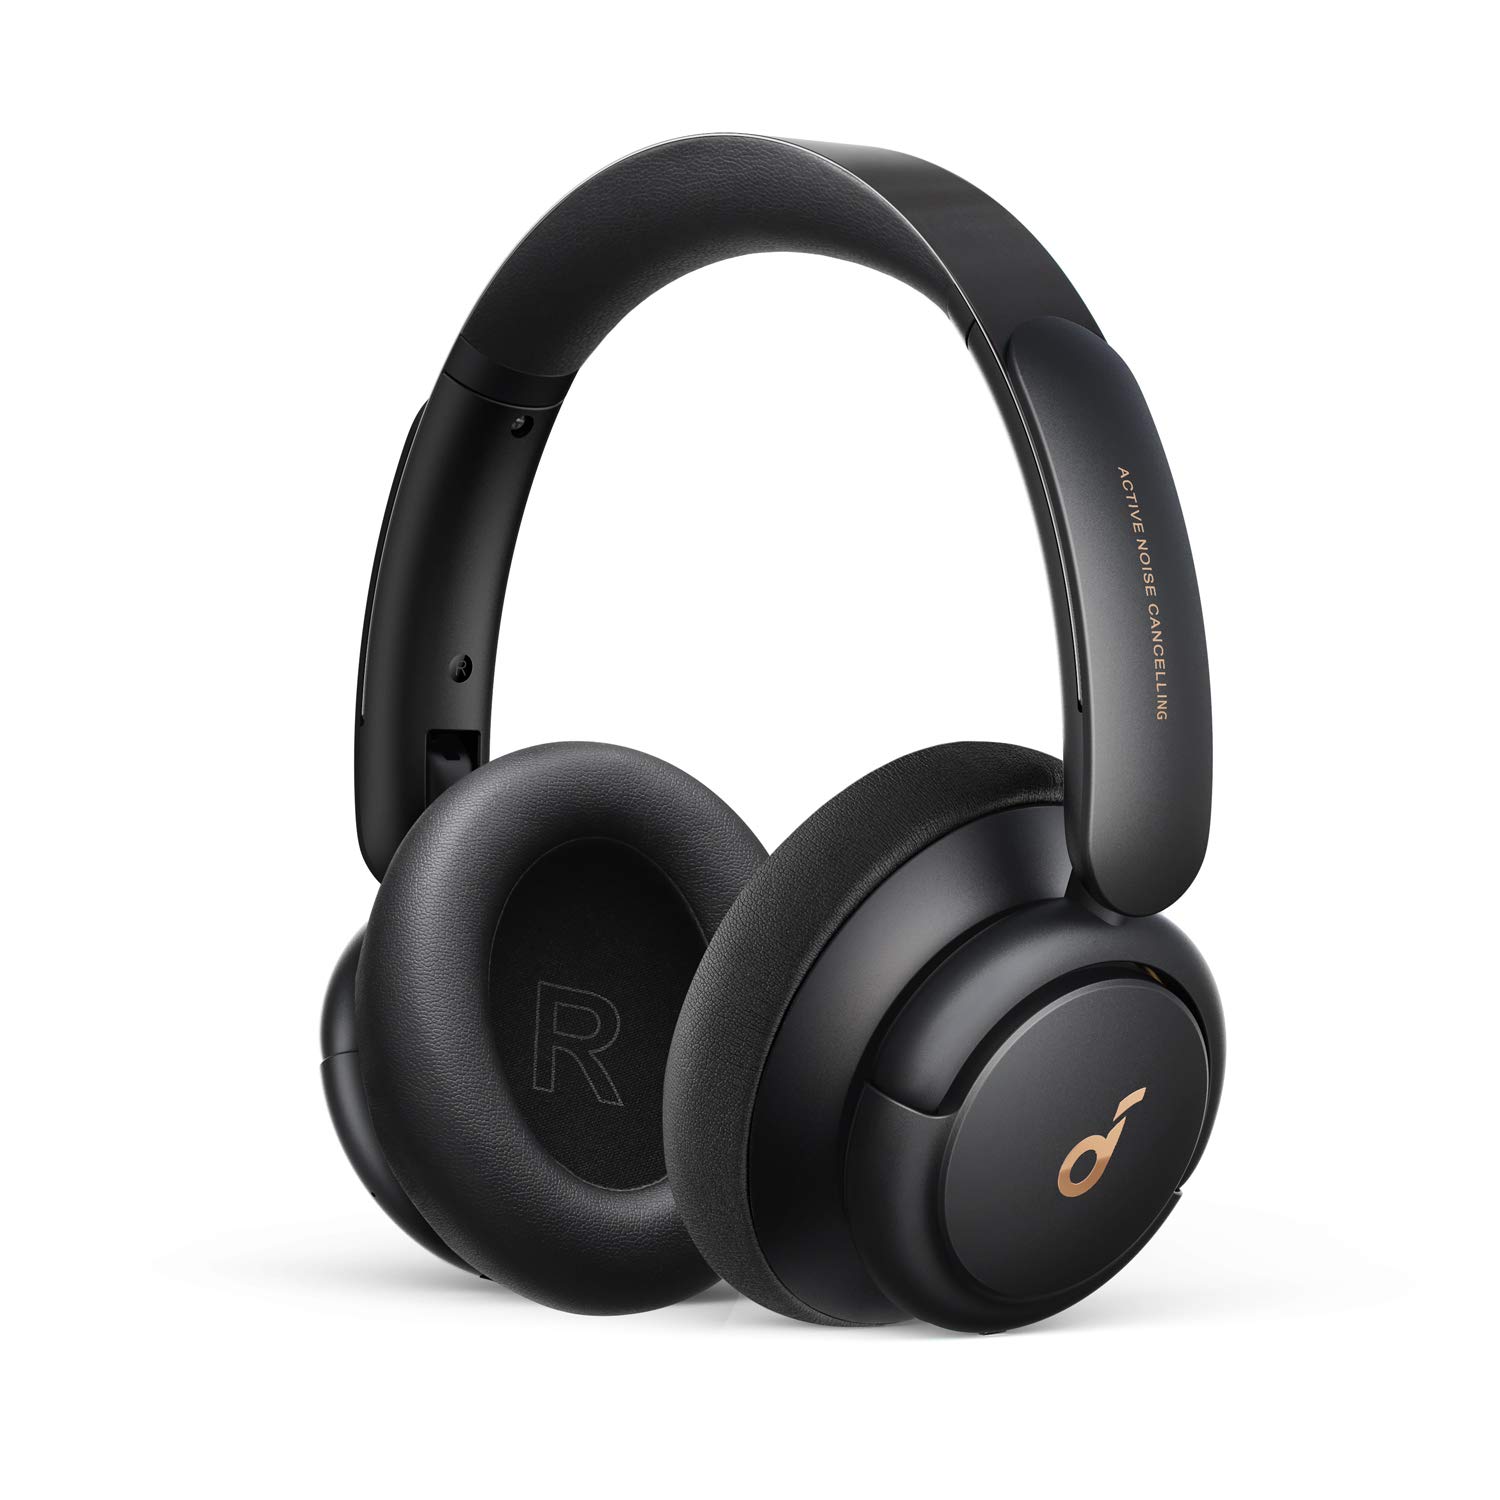 Anker Soundcore Life Q30 ANC Wireless Over-Ear Headphones $55.99 + Free Shipping @ Amazon